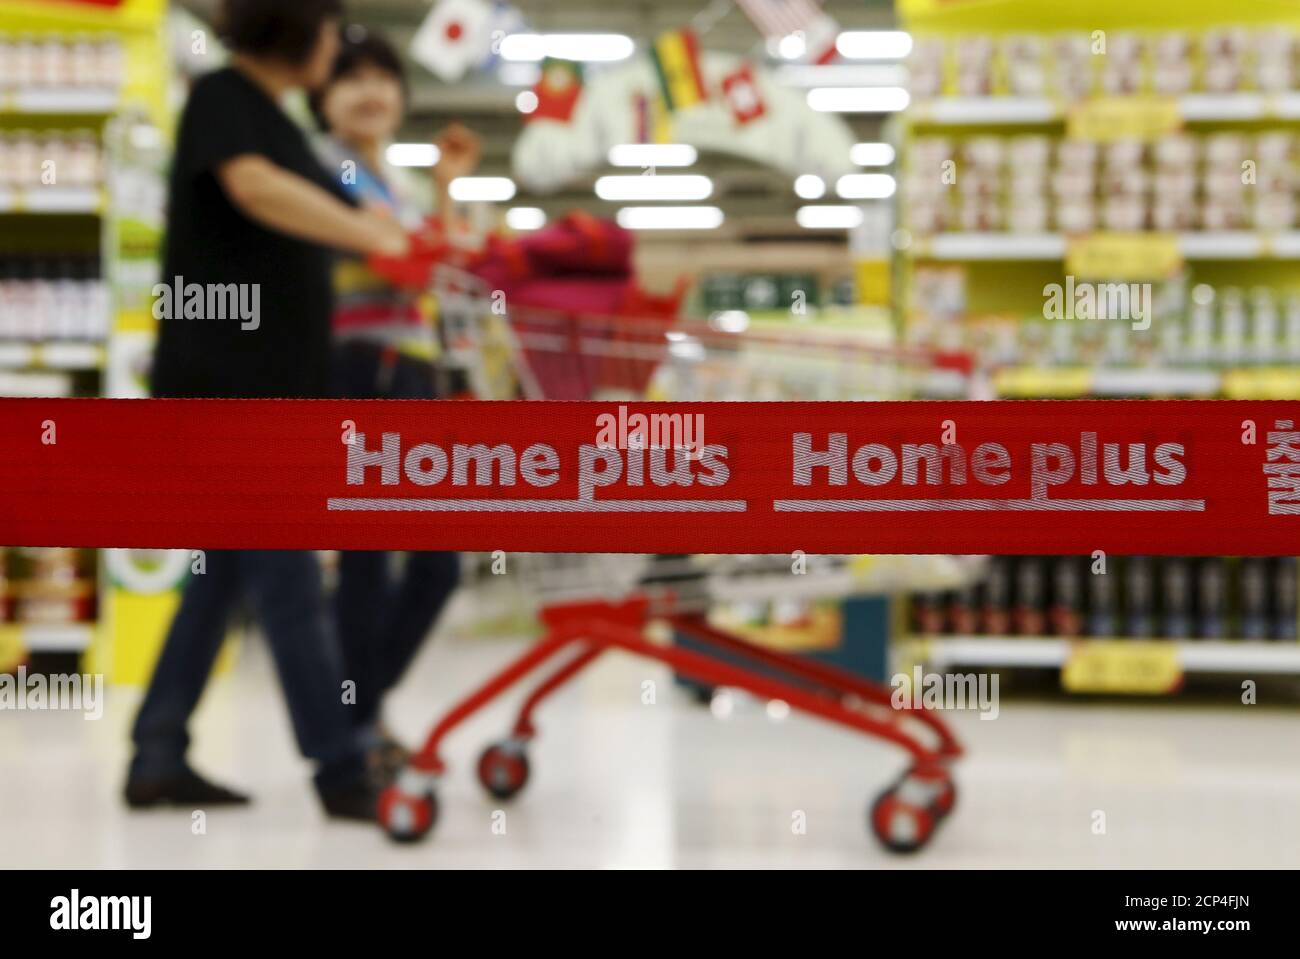 Women push their shopping carts at a Homeplus market in Seoul, South Korea,  August 24, 2015. British retailer Tesco has received three separate binding  bids for its South Korean unit Homeplus from